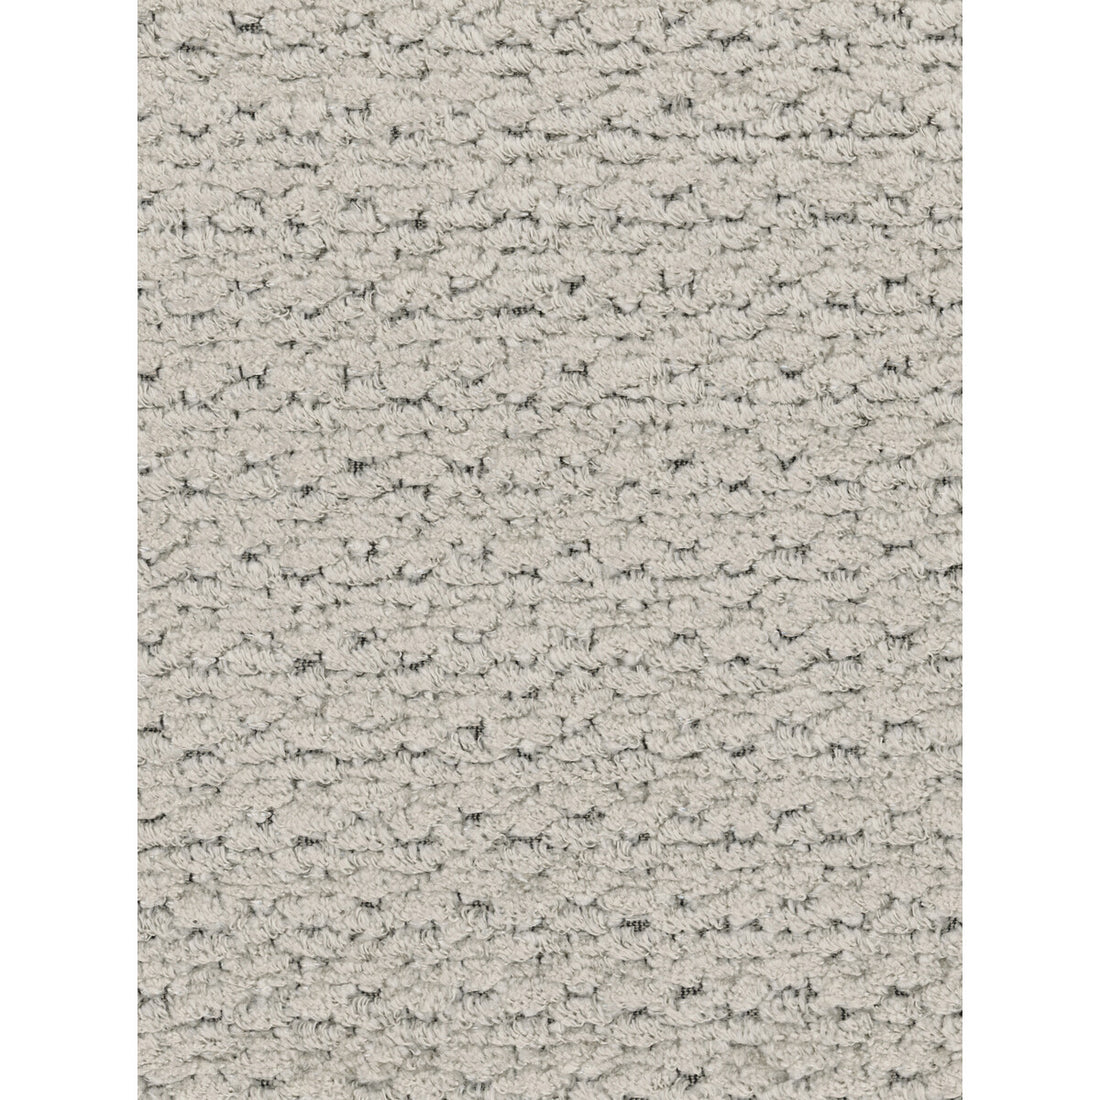 Dionysian Vel fabric in silver color - pattern GWF-3702.11.0 - by Lee Jofa Modern in the Prism collection